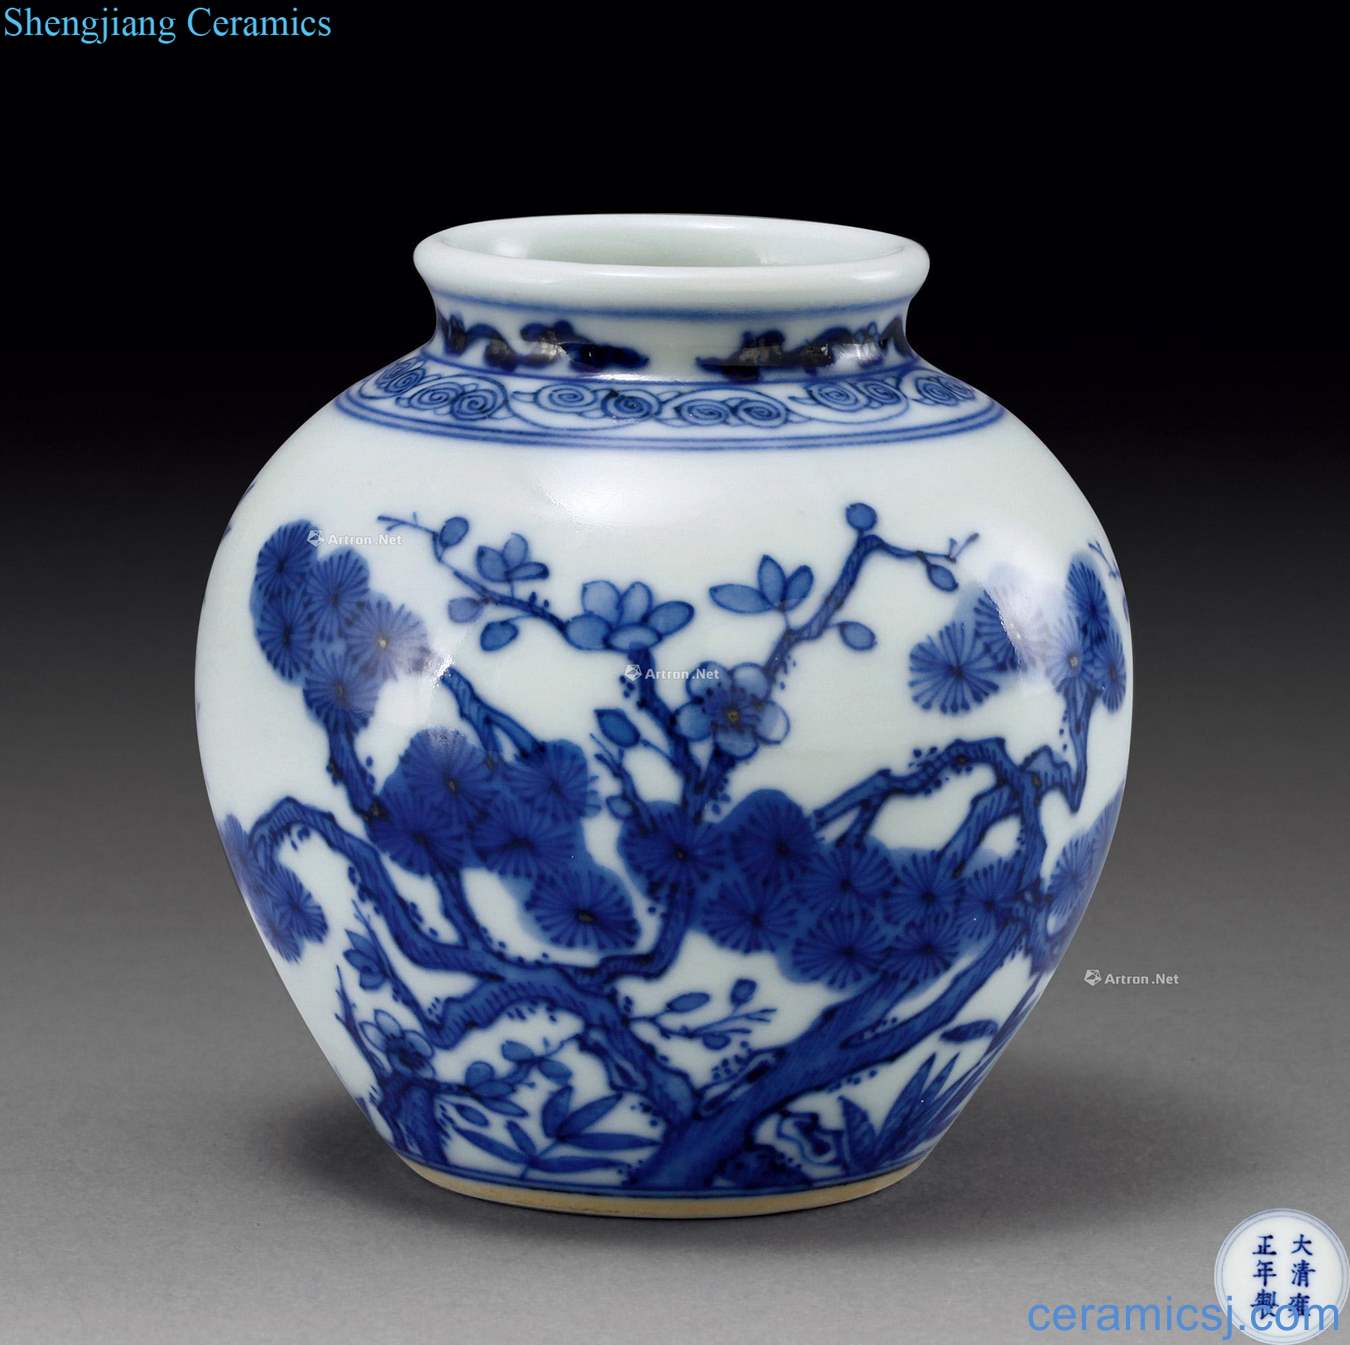 Qing yongzheng Blue and white, poetic cans